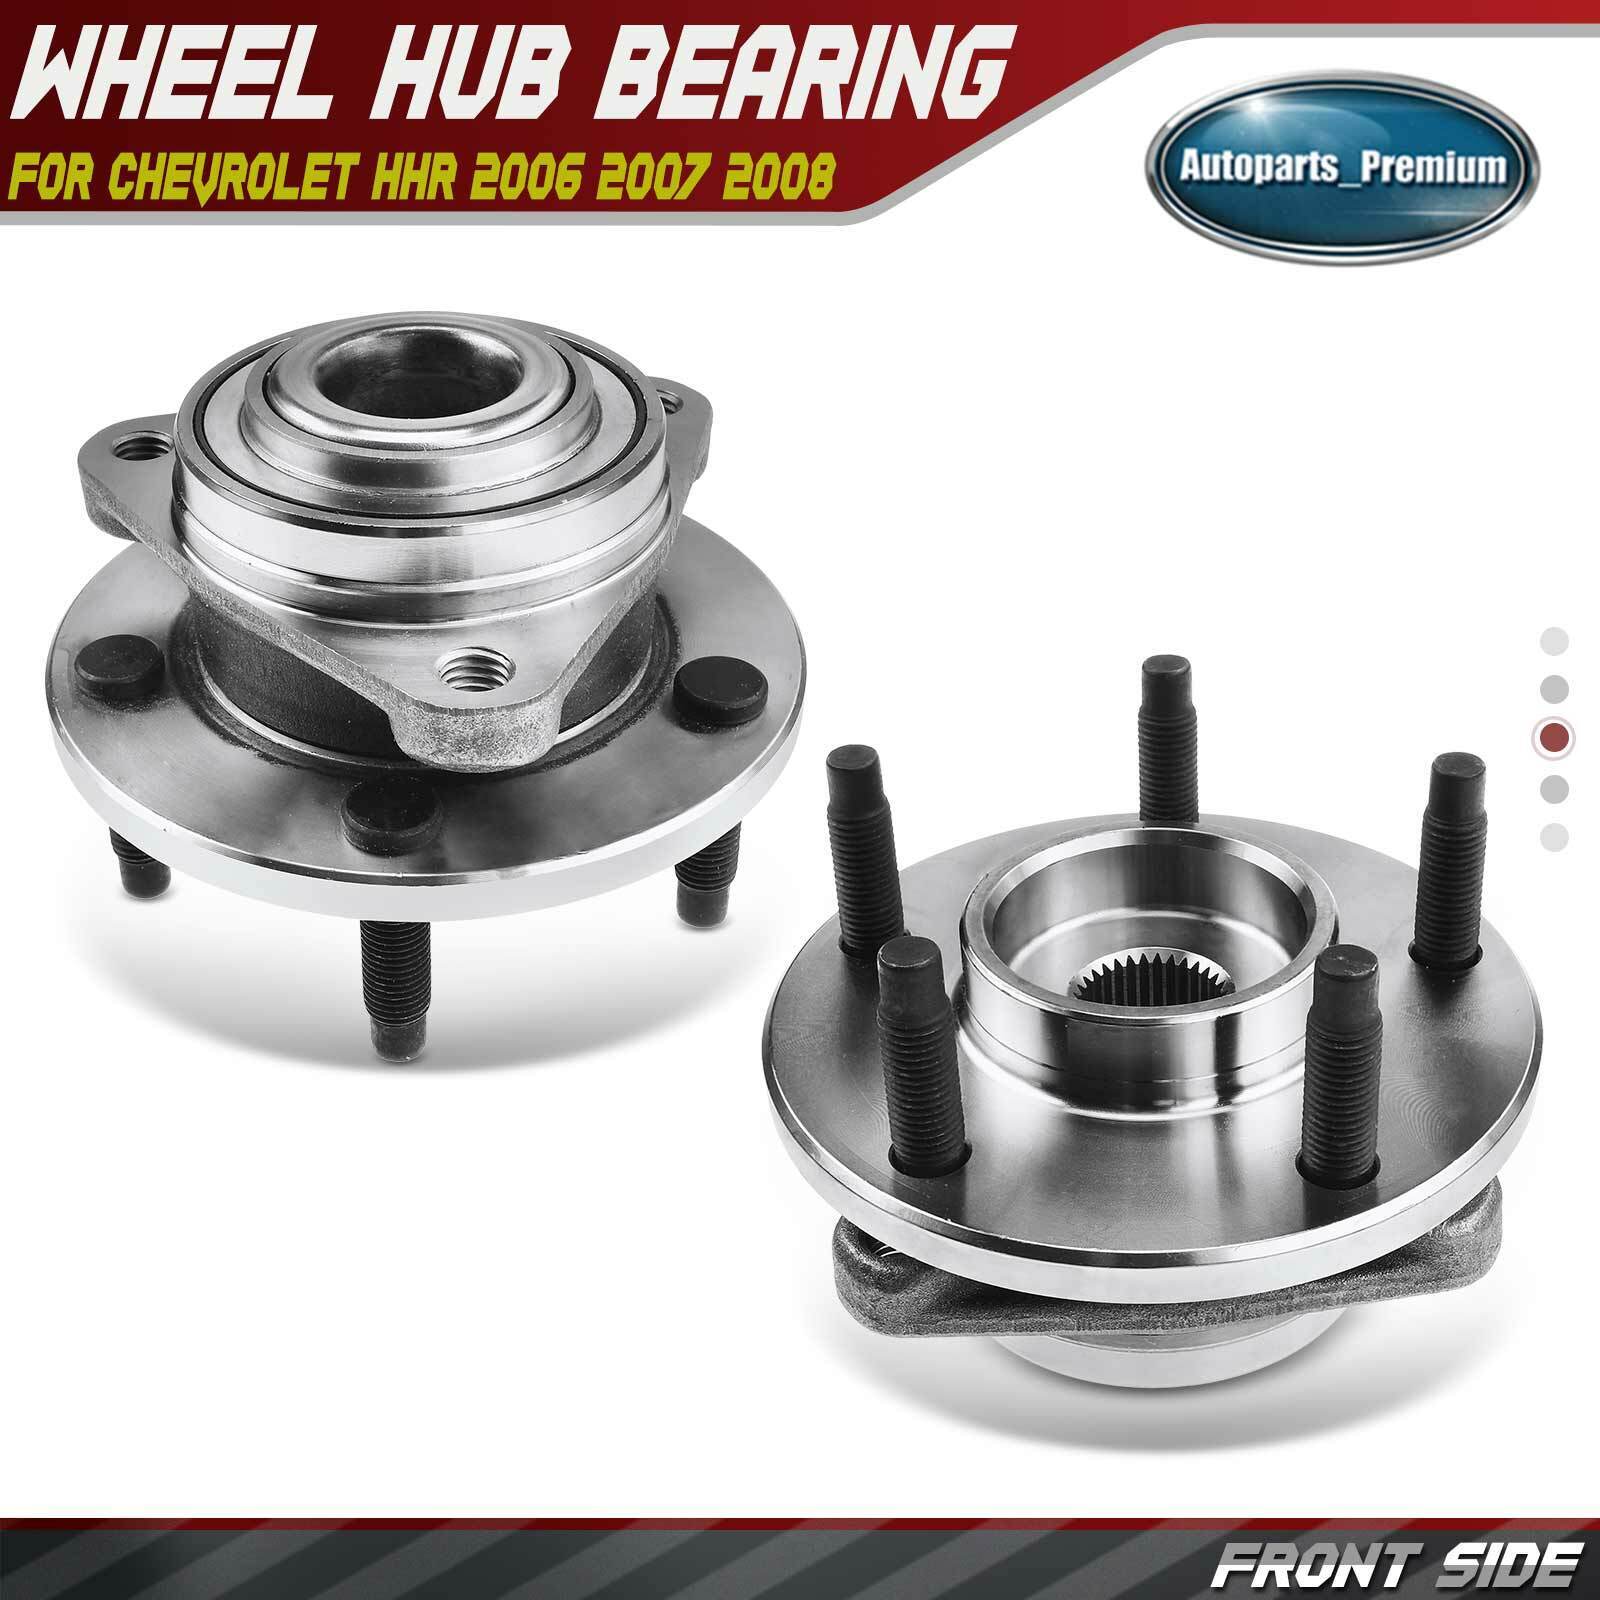 2x Wheel Bearing Hub Assembly for Chevrolet HHR 2006-2008 Front LH & RH w/o ABS